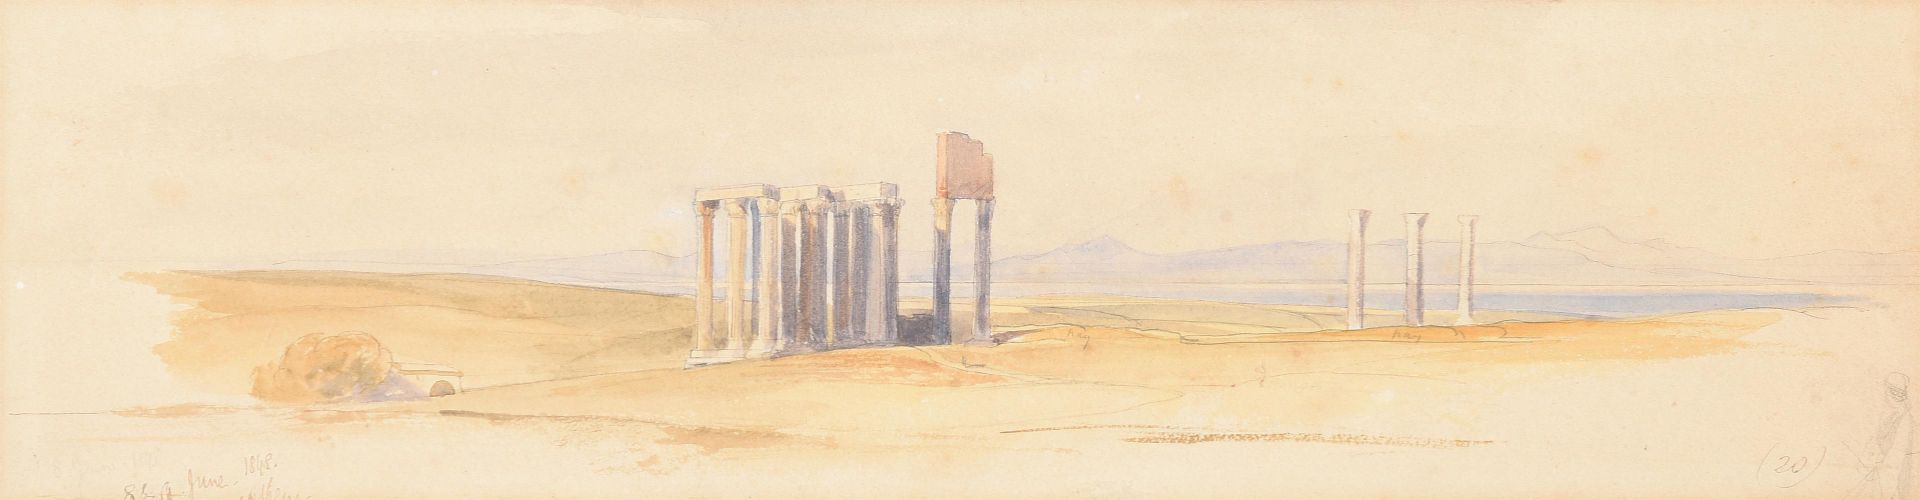 EDWARD LEAR (ENGLISH 1812-1888), TEMPLE RUINS IN ATHENS [ZEUS OLYMPIC] - Bild 2 aus 2